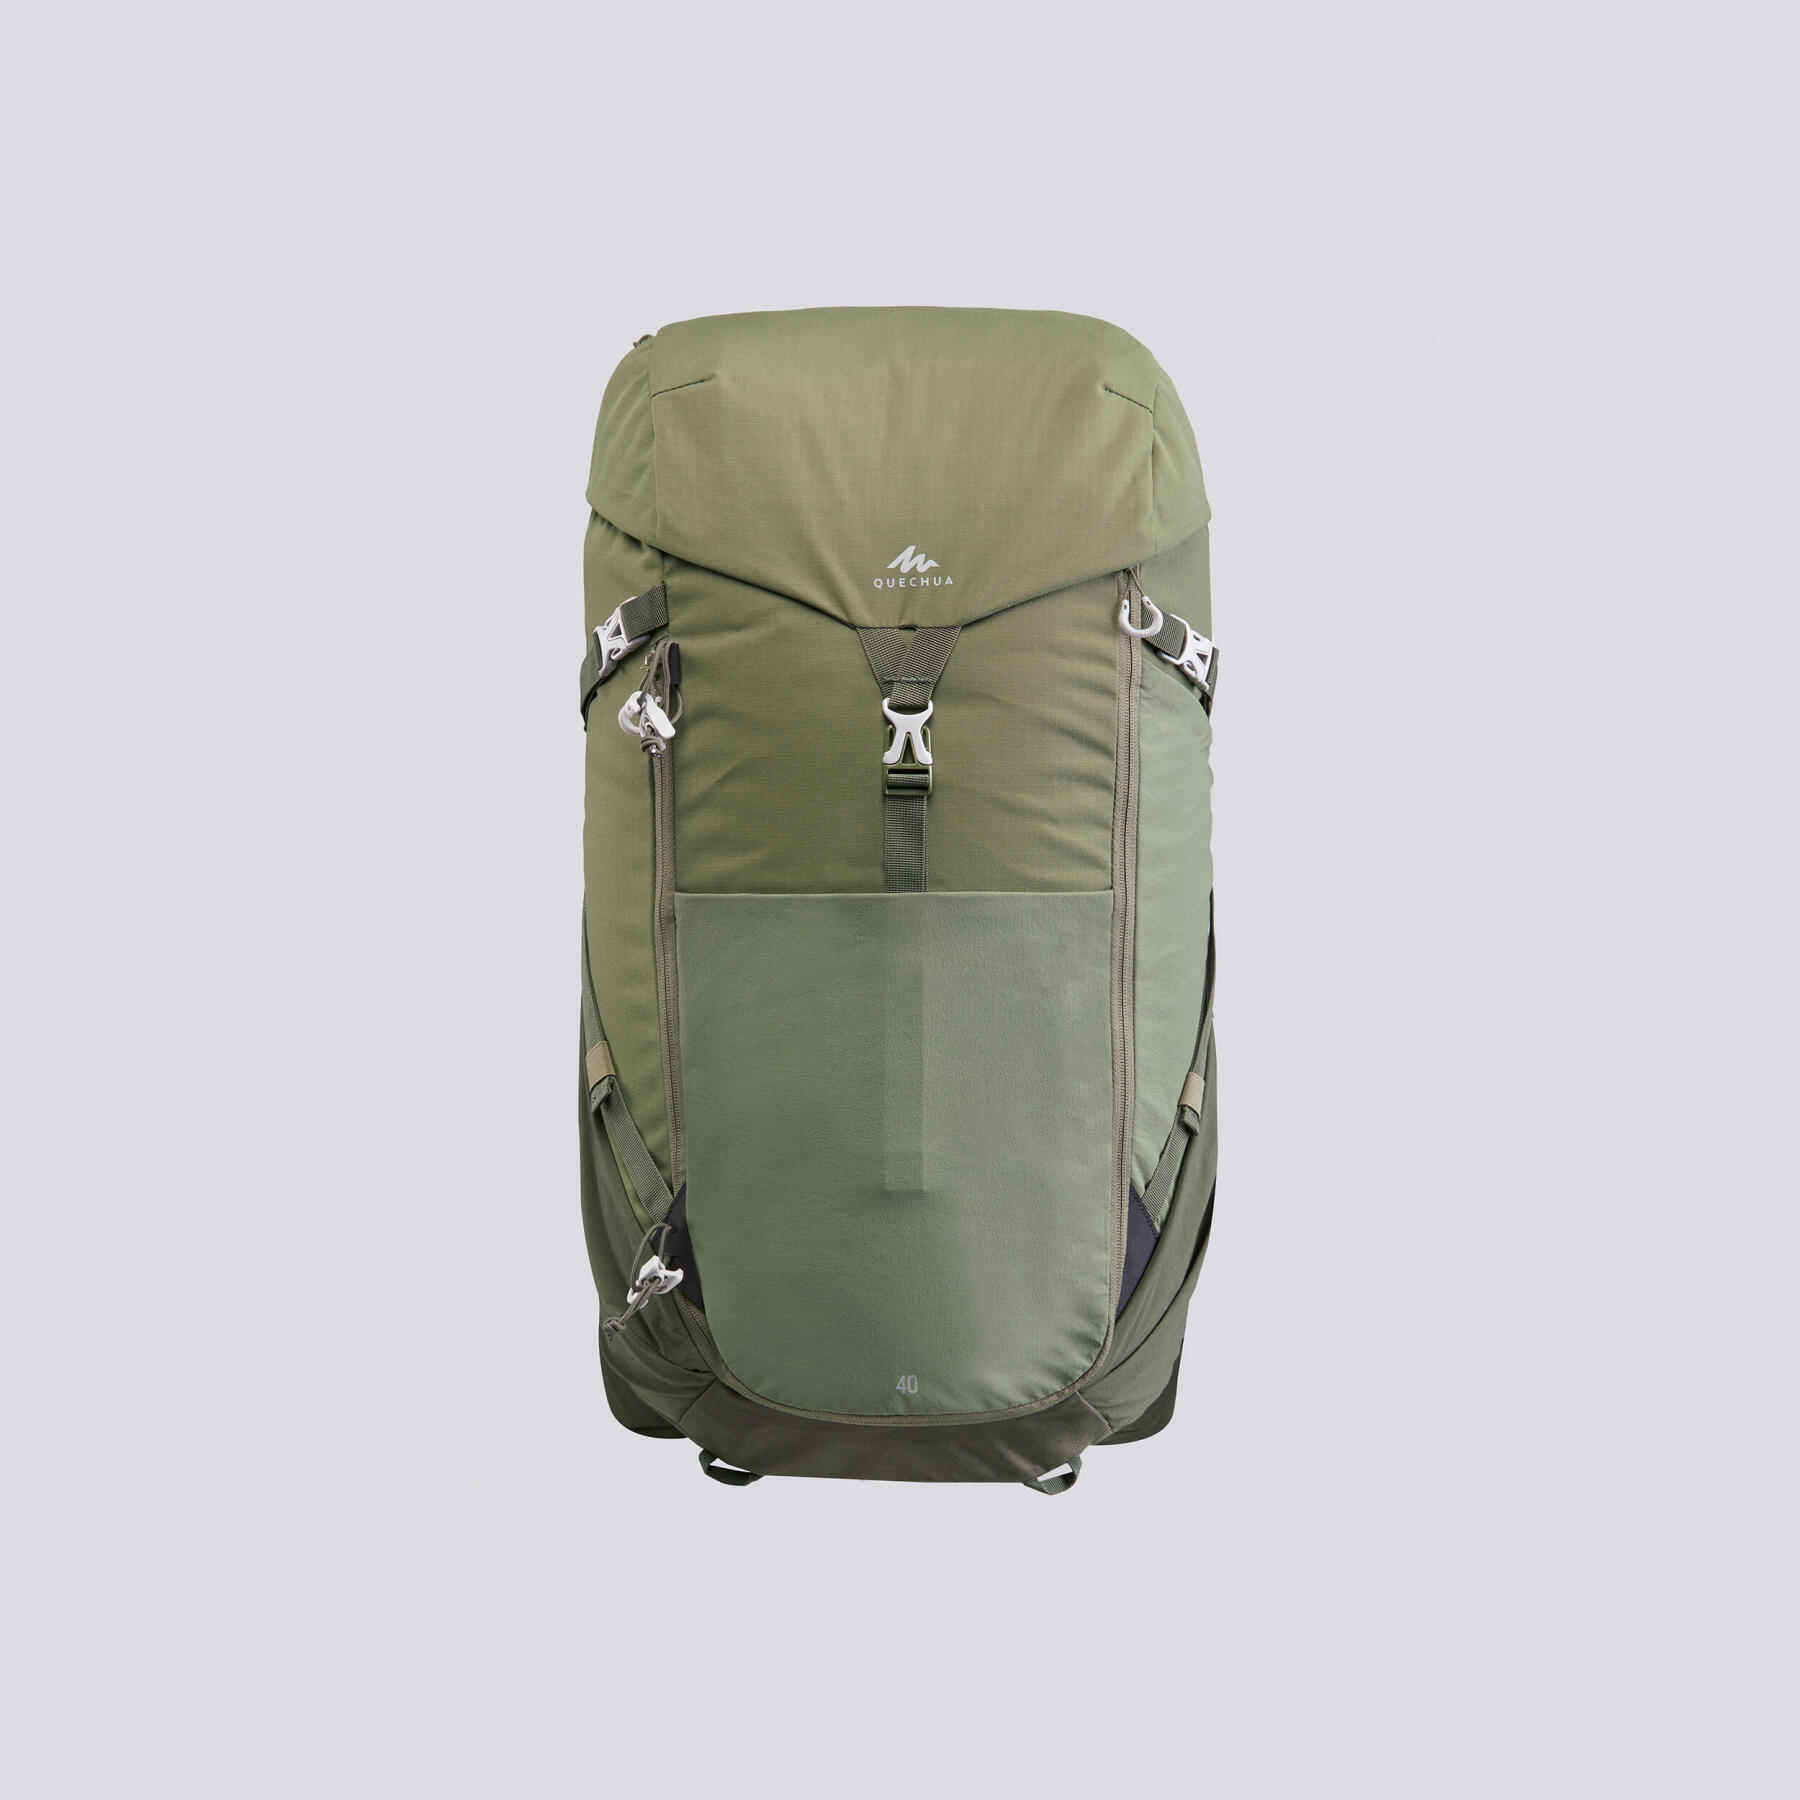 Outdoor Backpack Bag with Two Side Pockets and Two Front Pockets